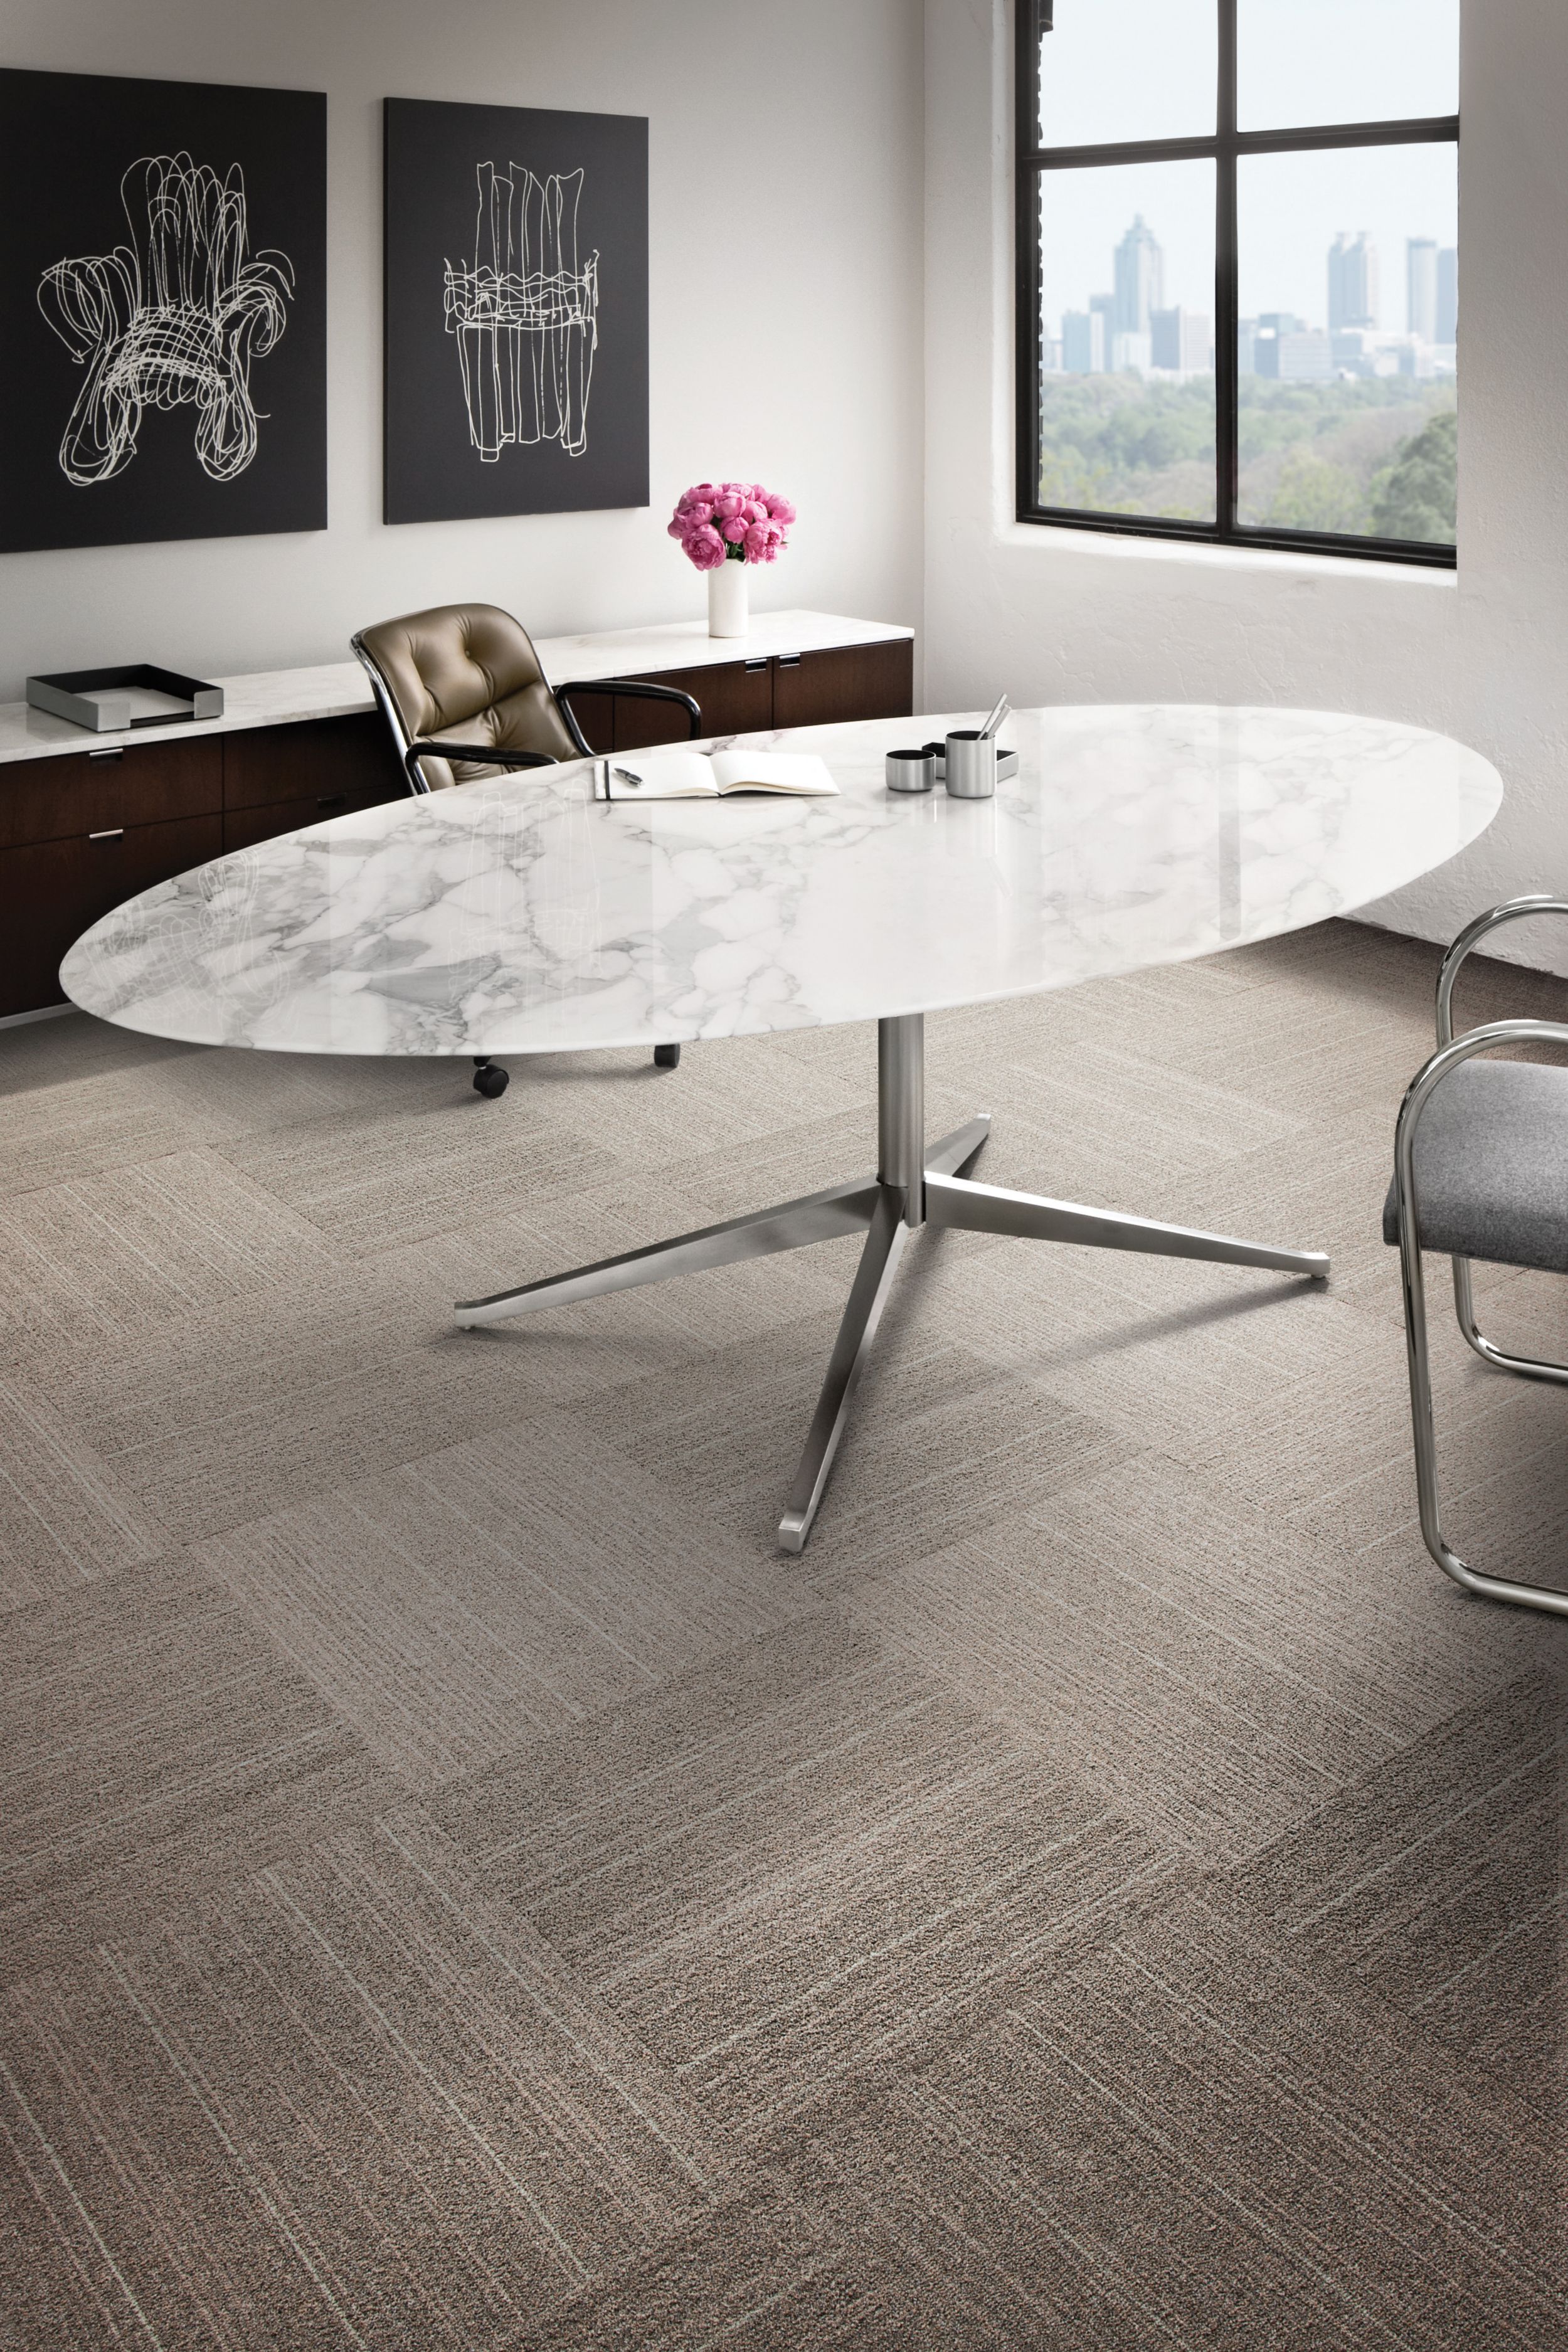 Flannel: Commercial Carpet Tile by Interface